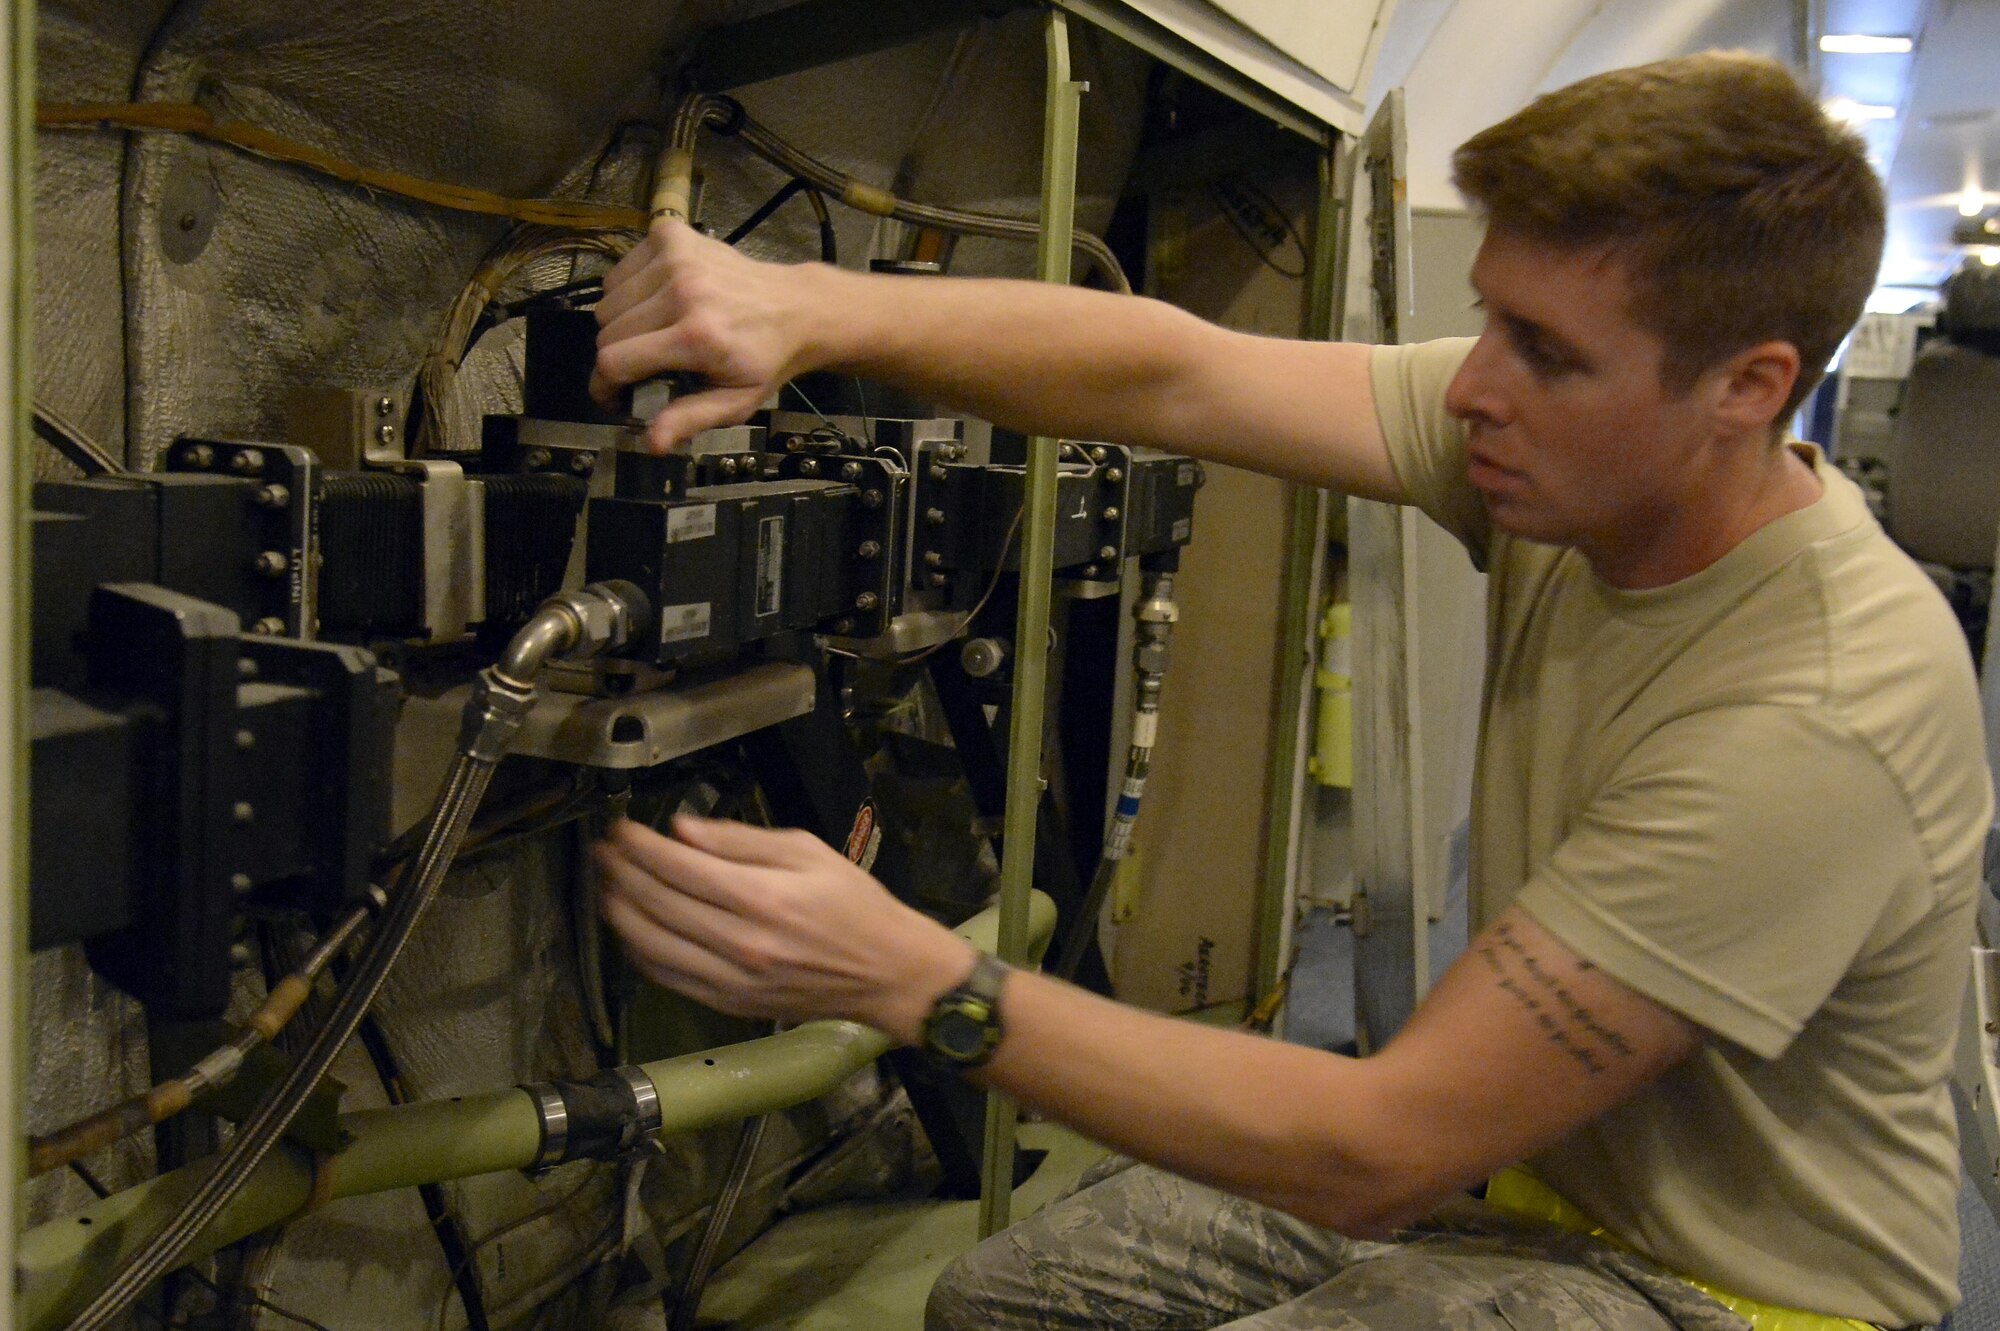 Senior Airman Travis, surveillance radar technician, inspects the wave guide for any signs of damage or leaking, and ensures the connectors are secure during a preflight inspection on an E-3 Sentry airborne warning and control system aircraft at an undisclosed location in Southwest Asia Feb. 24, 2015. Sentry Aircraft Maintenance Unit Airmen provide command and control battle management to the combatant commanders here in the area of responsibility. Travis is currently deployed from Tinker AFB, Okla., and is a native of Snohomish, Wash. (U.S. Air Force photo/Tech. Sgt. Marie Brown)